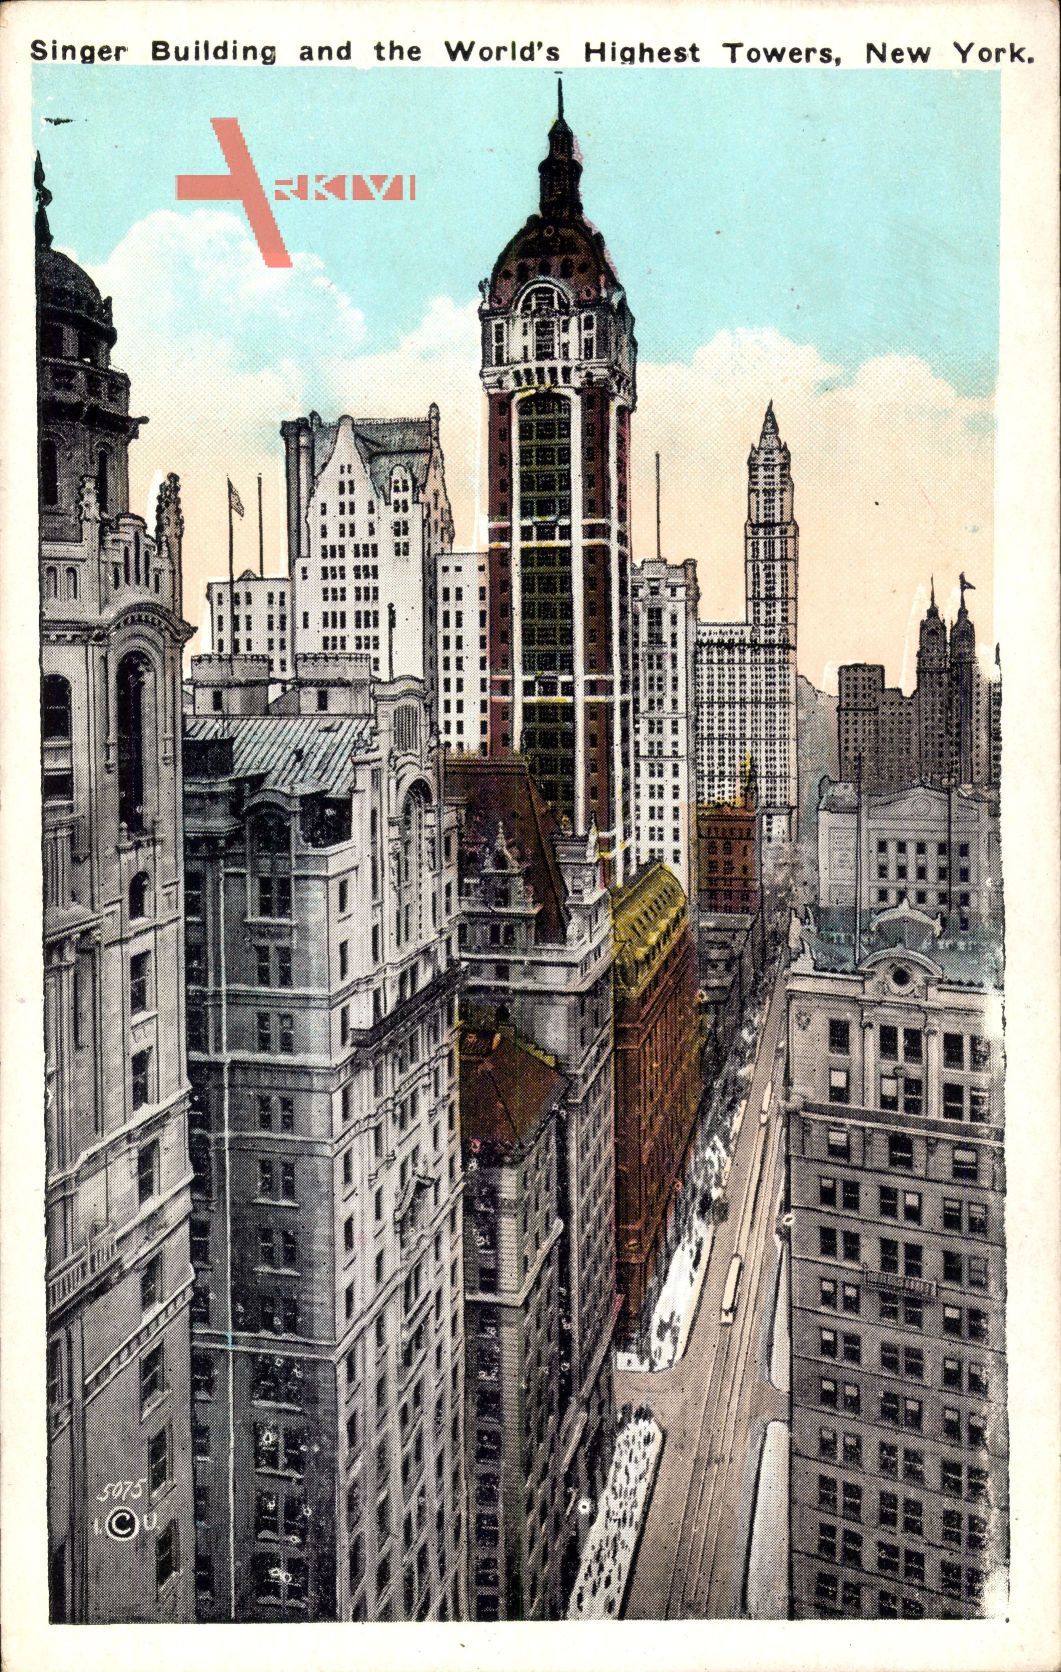 New York City USA, Singer Building and the World's Highest Towers